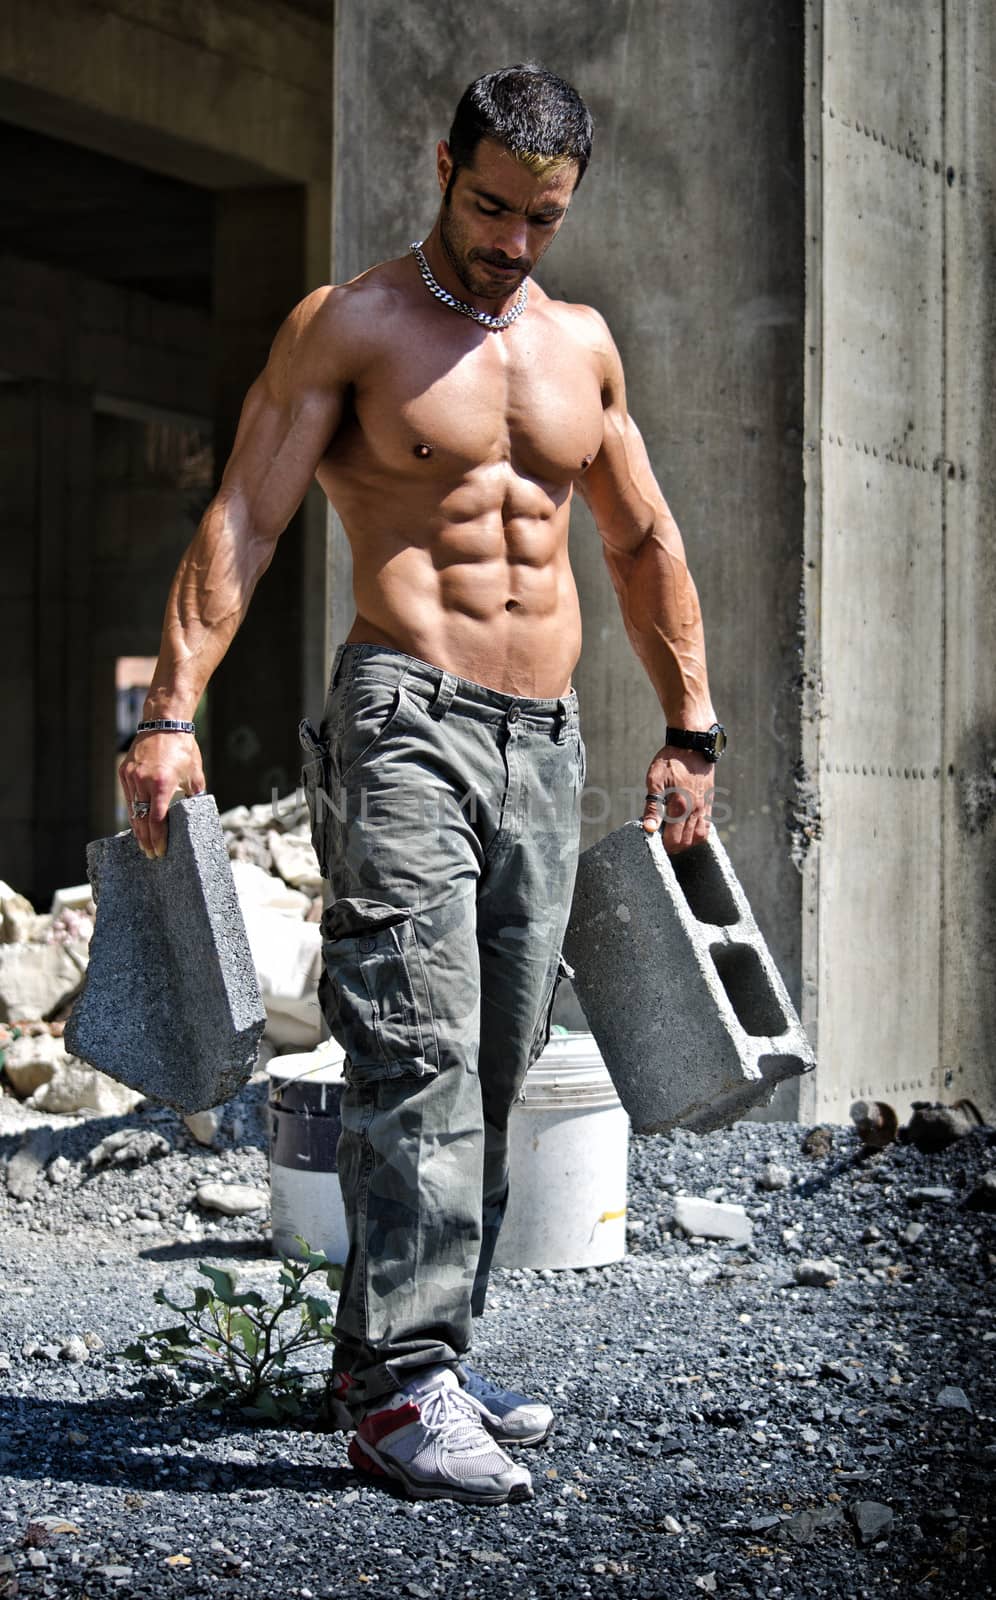 Sexy construction worker shirtless showing muscular body, holding big bricks